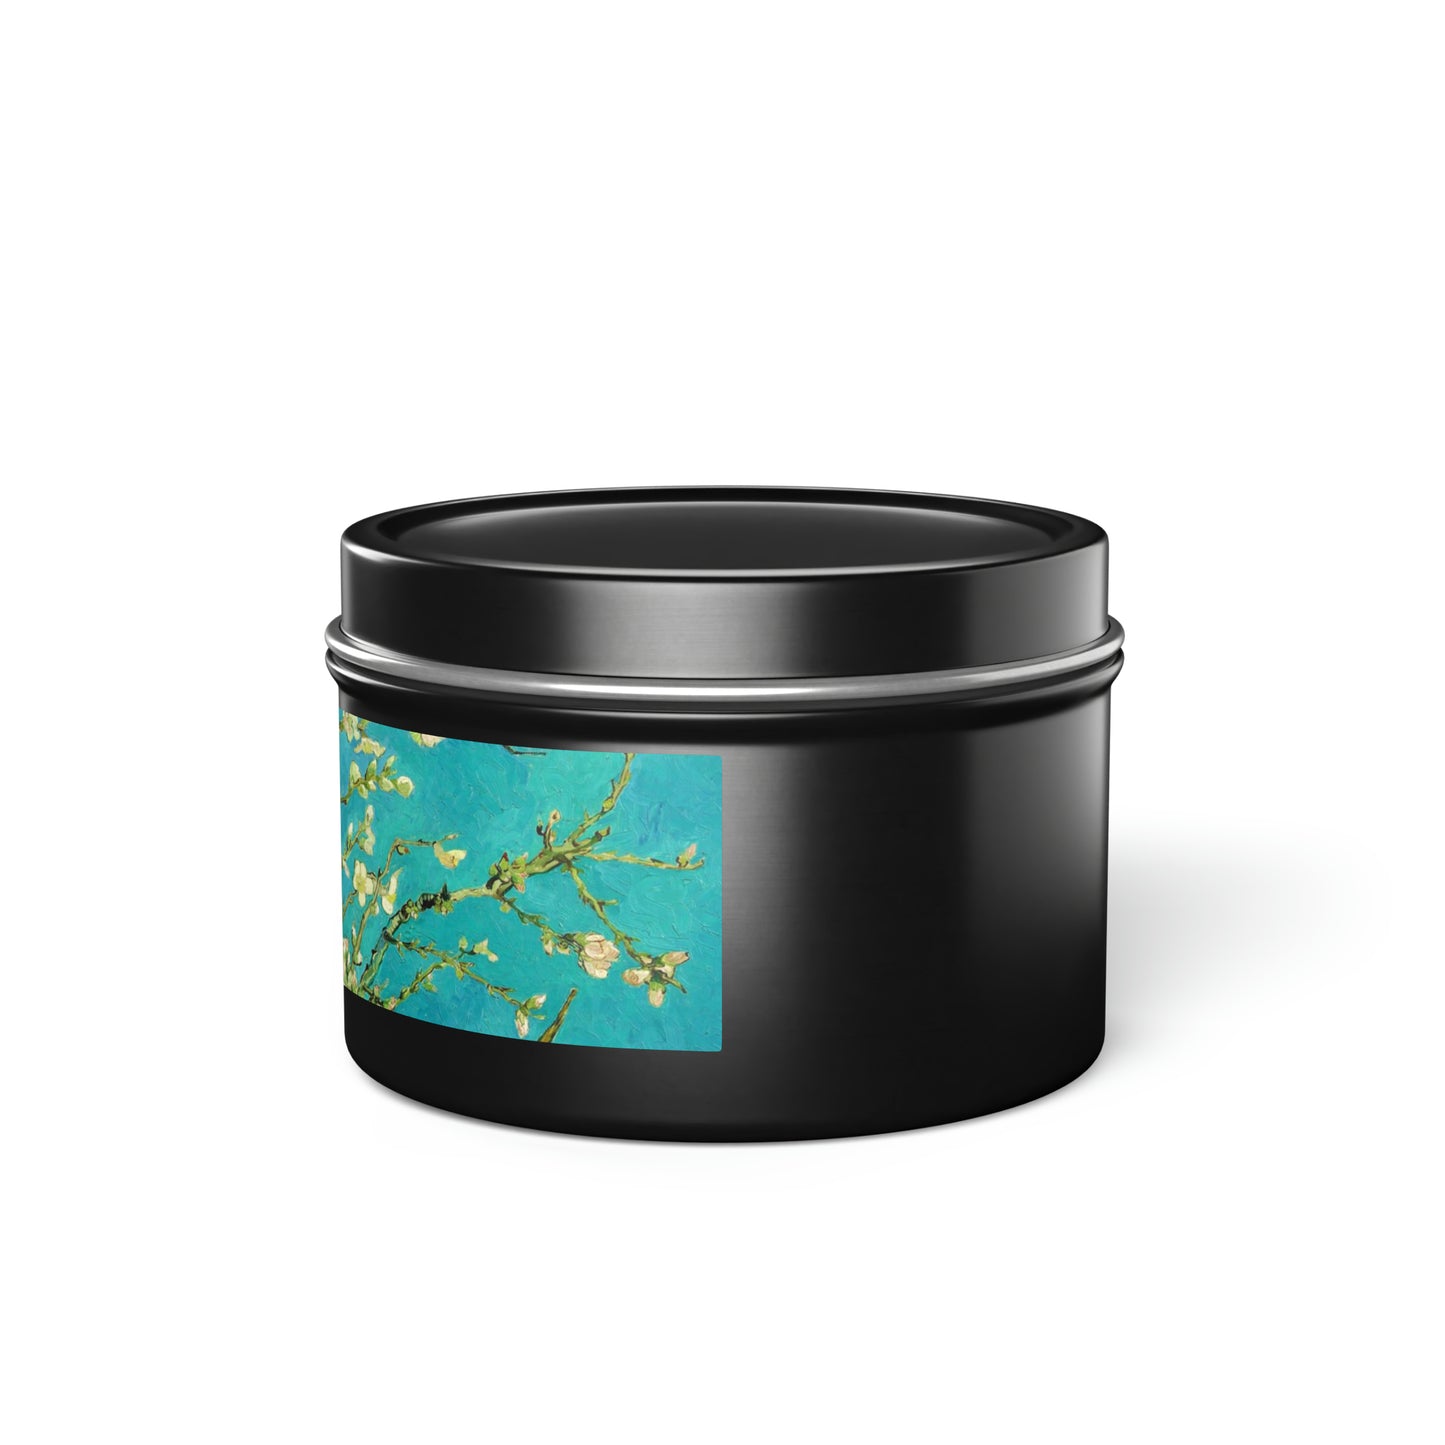 VINCENT VAN GOGH - ALMOND BLOSSOMS - TIN CANDLE - LOVED!